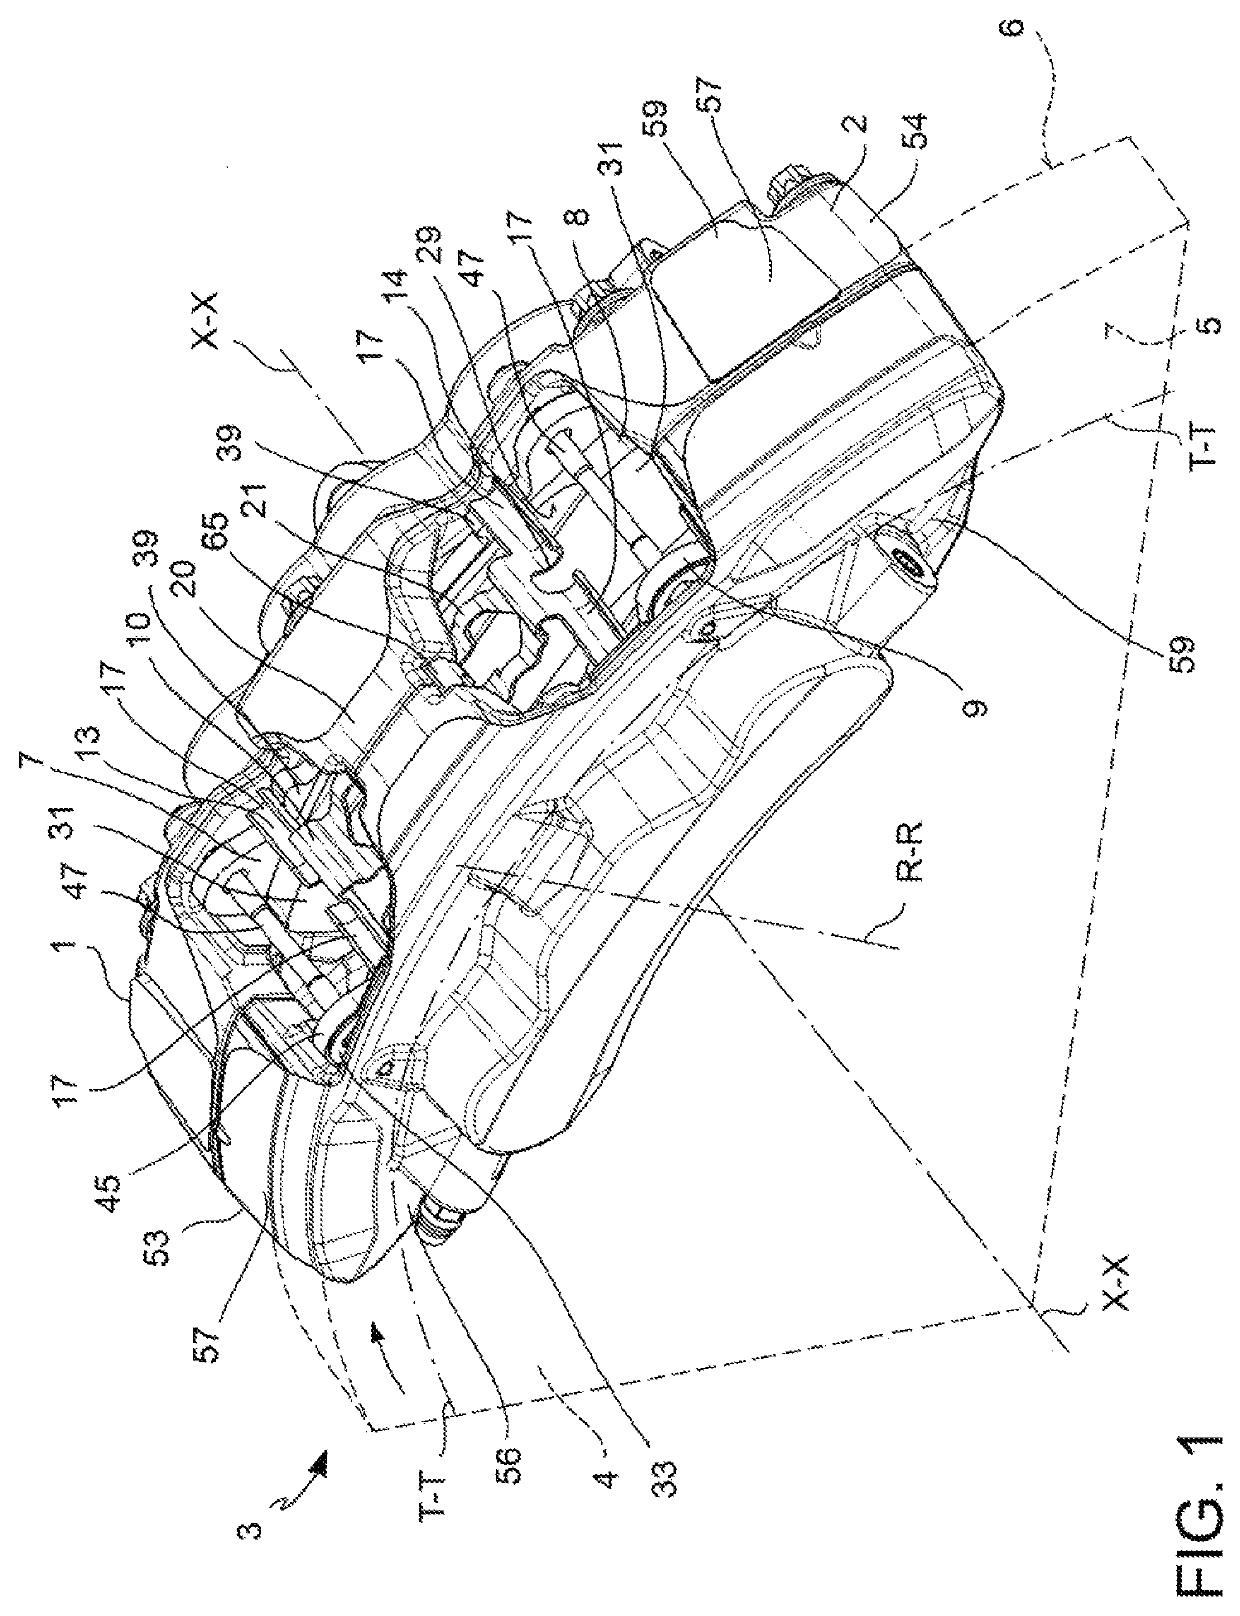 Spring device for disc brake, pad spring and disc brake assembly